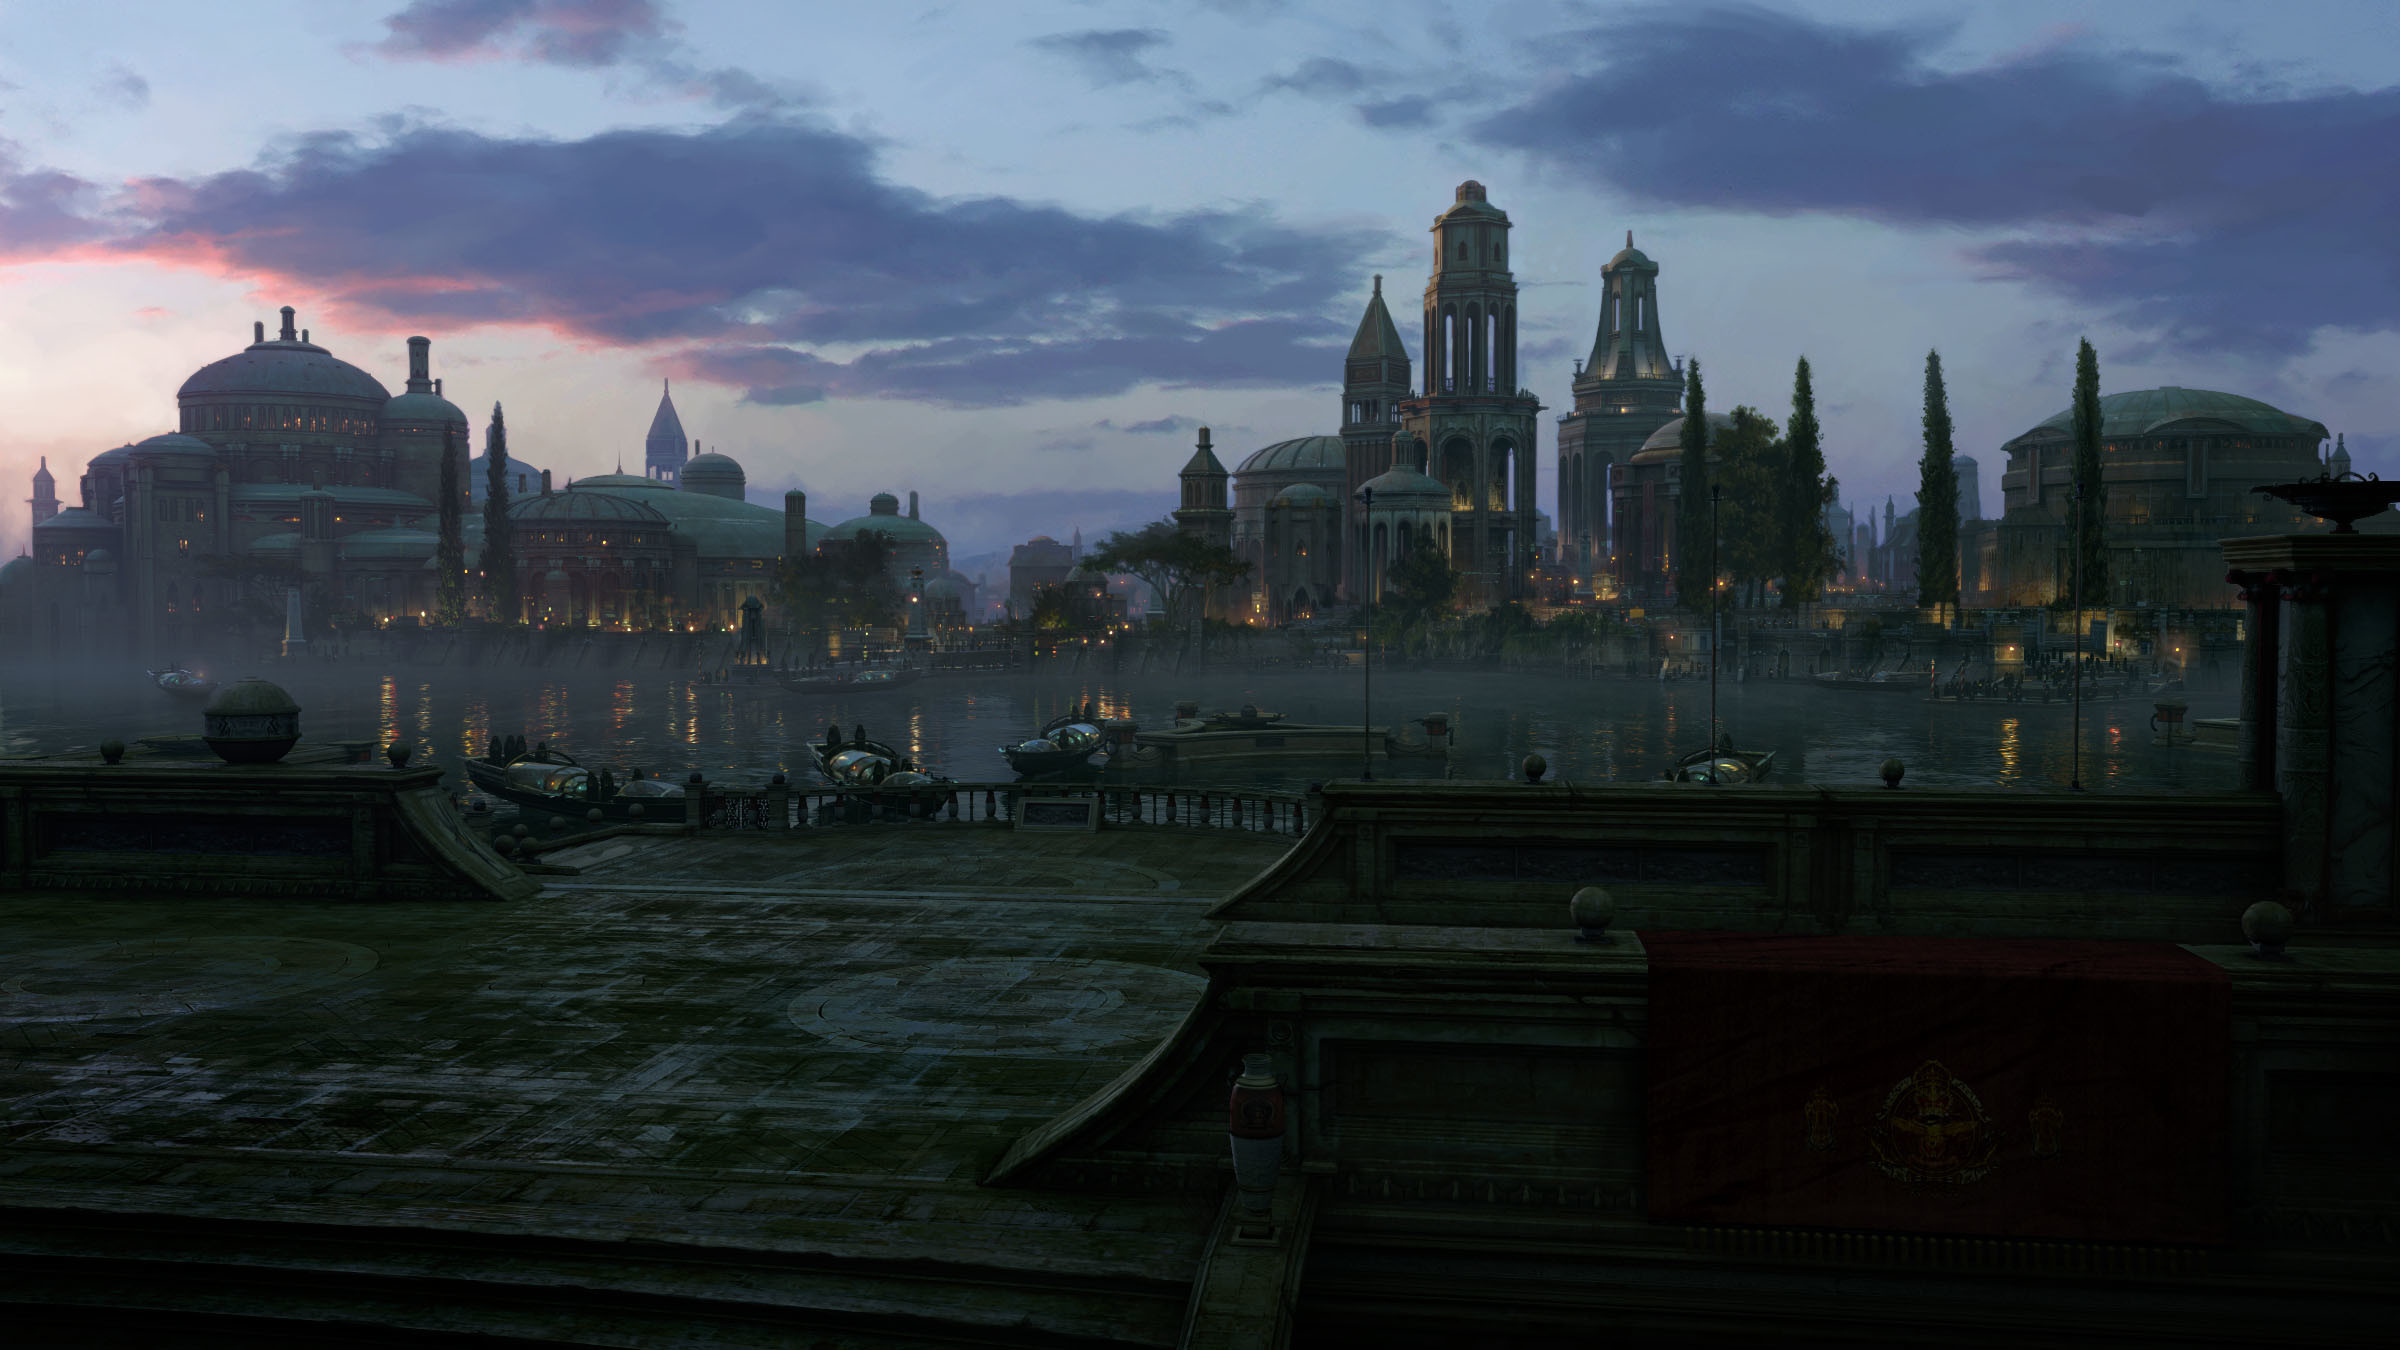 Star Wars Image Landscape HD: Naboo (2400 1350) HD Wallpaper And